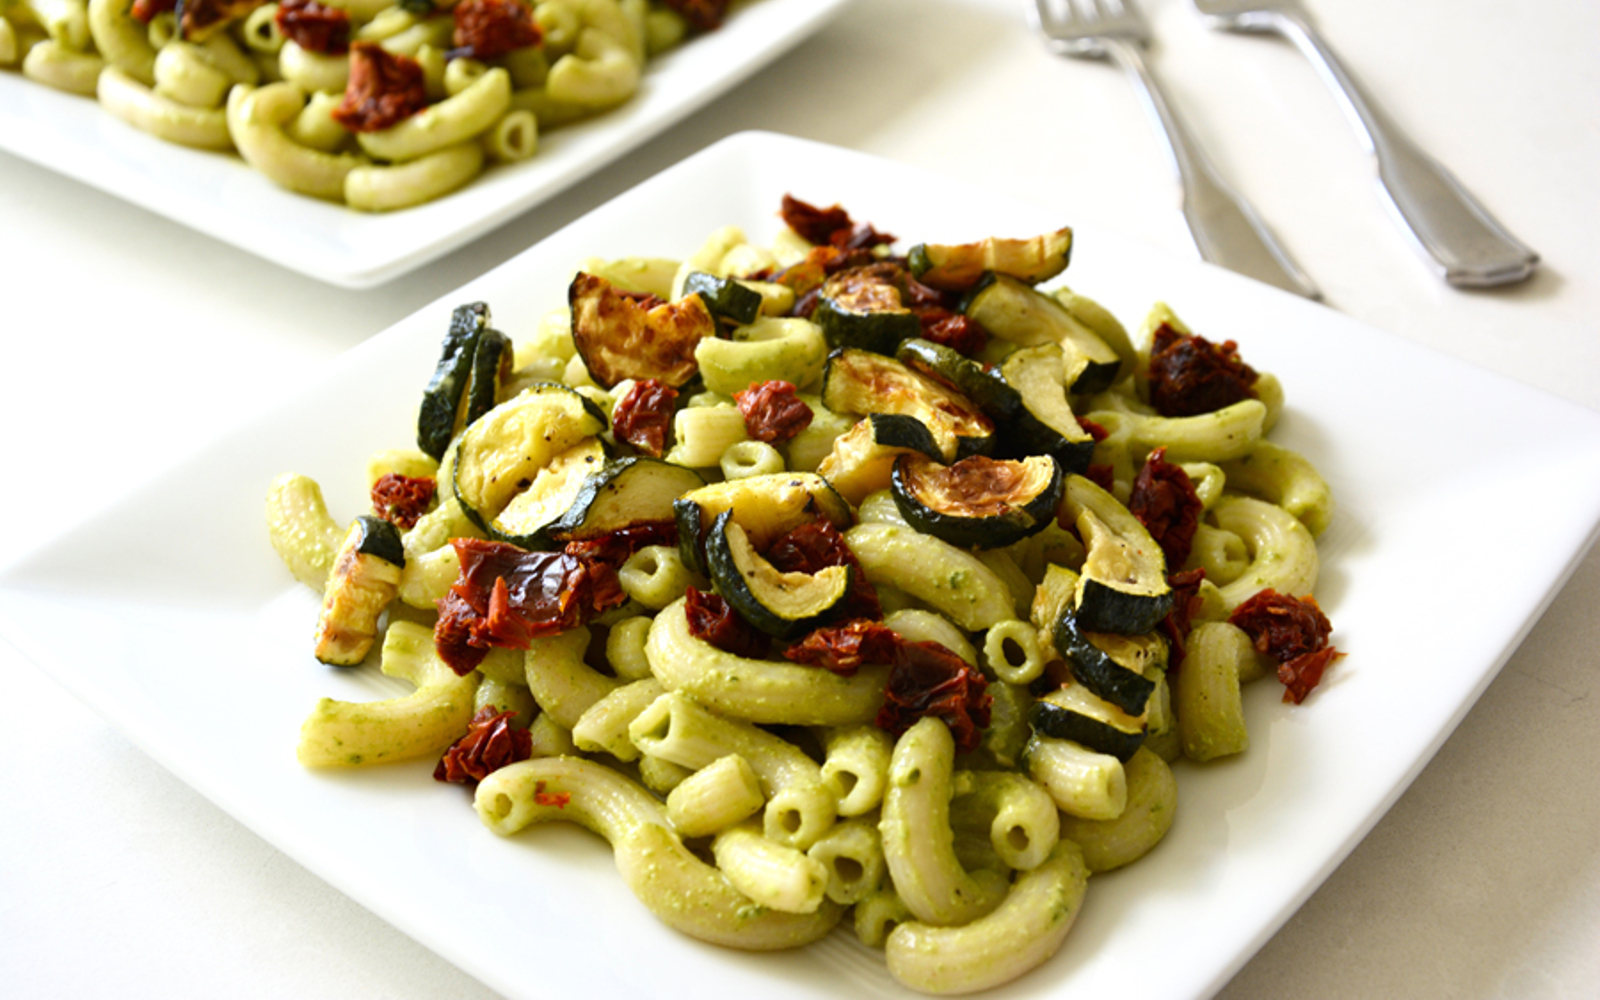 Pesto Pasta With Roasted Vegetables